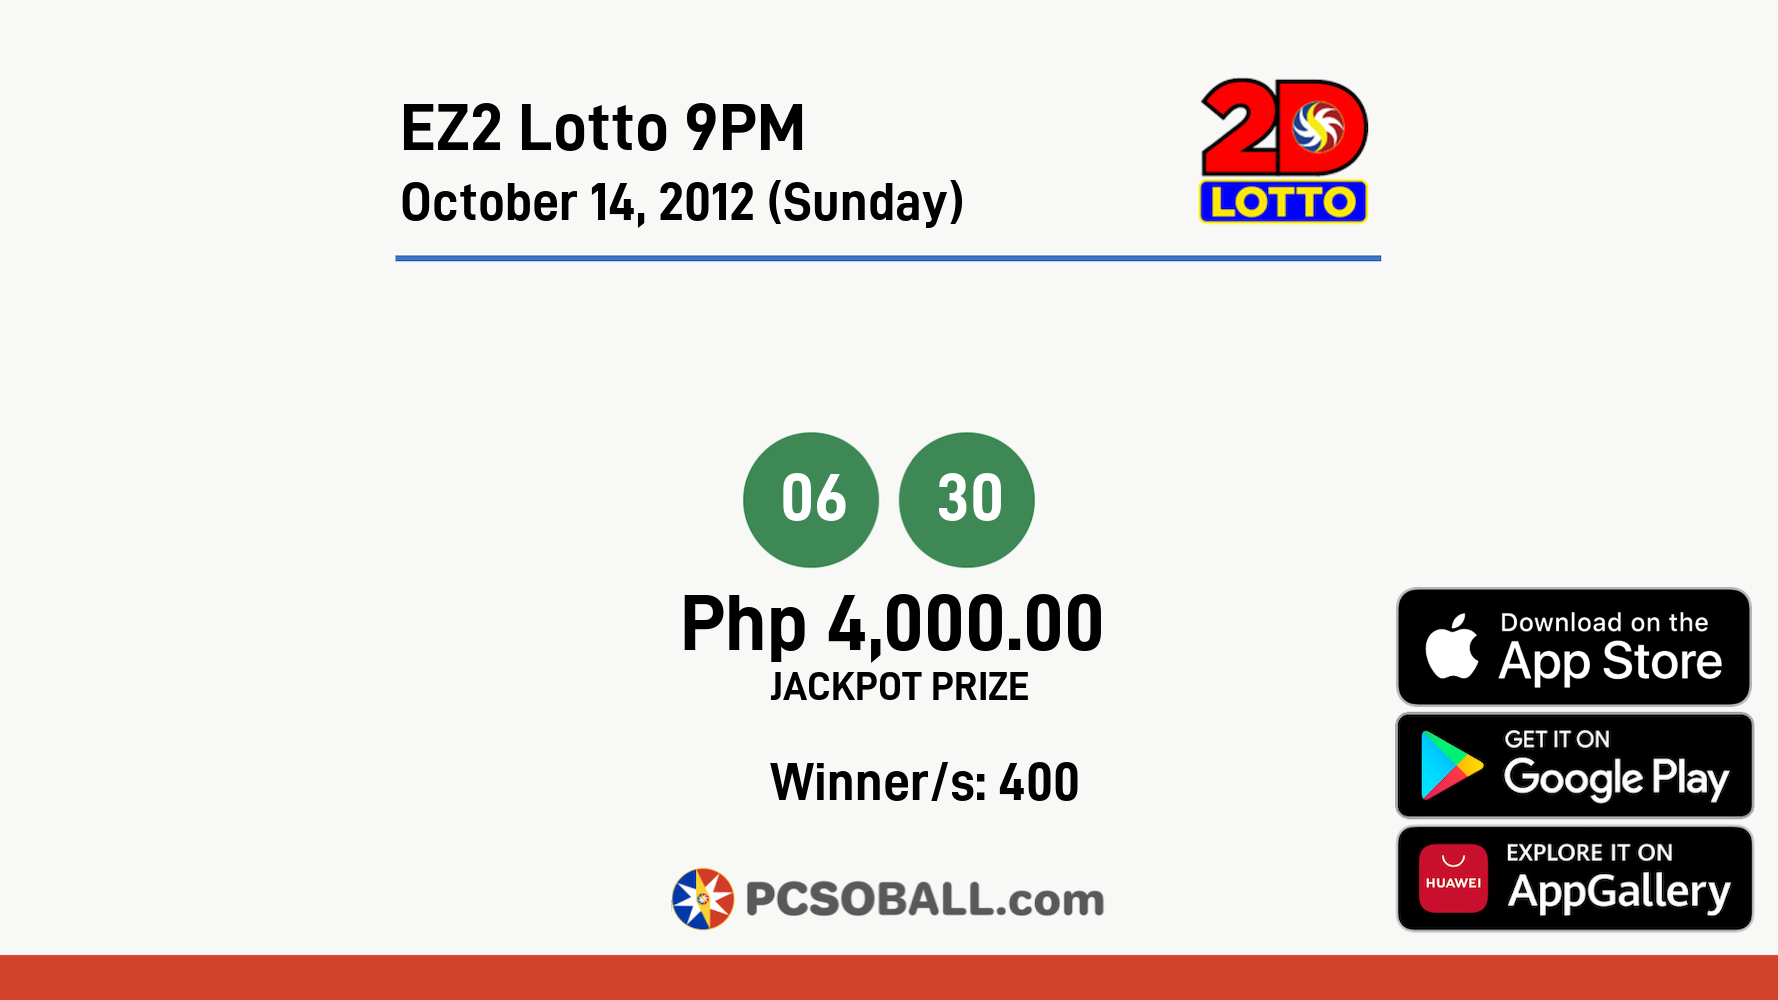 EZ2 Lotto 9PM October 14, 2012 (Sunday) Result